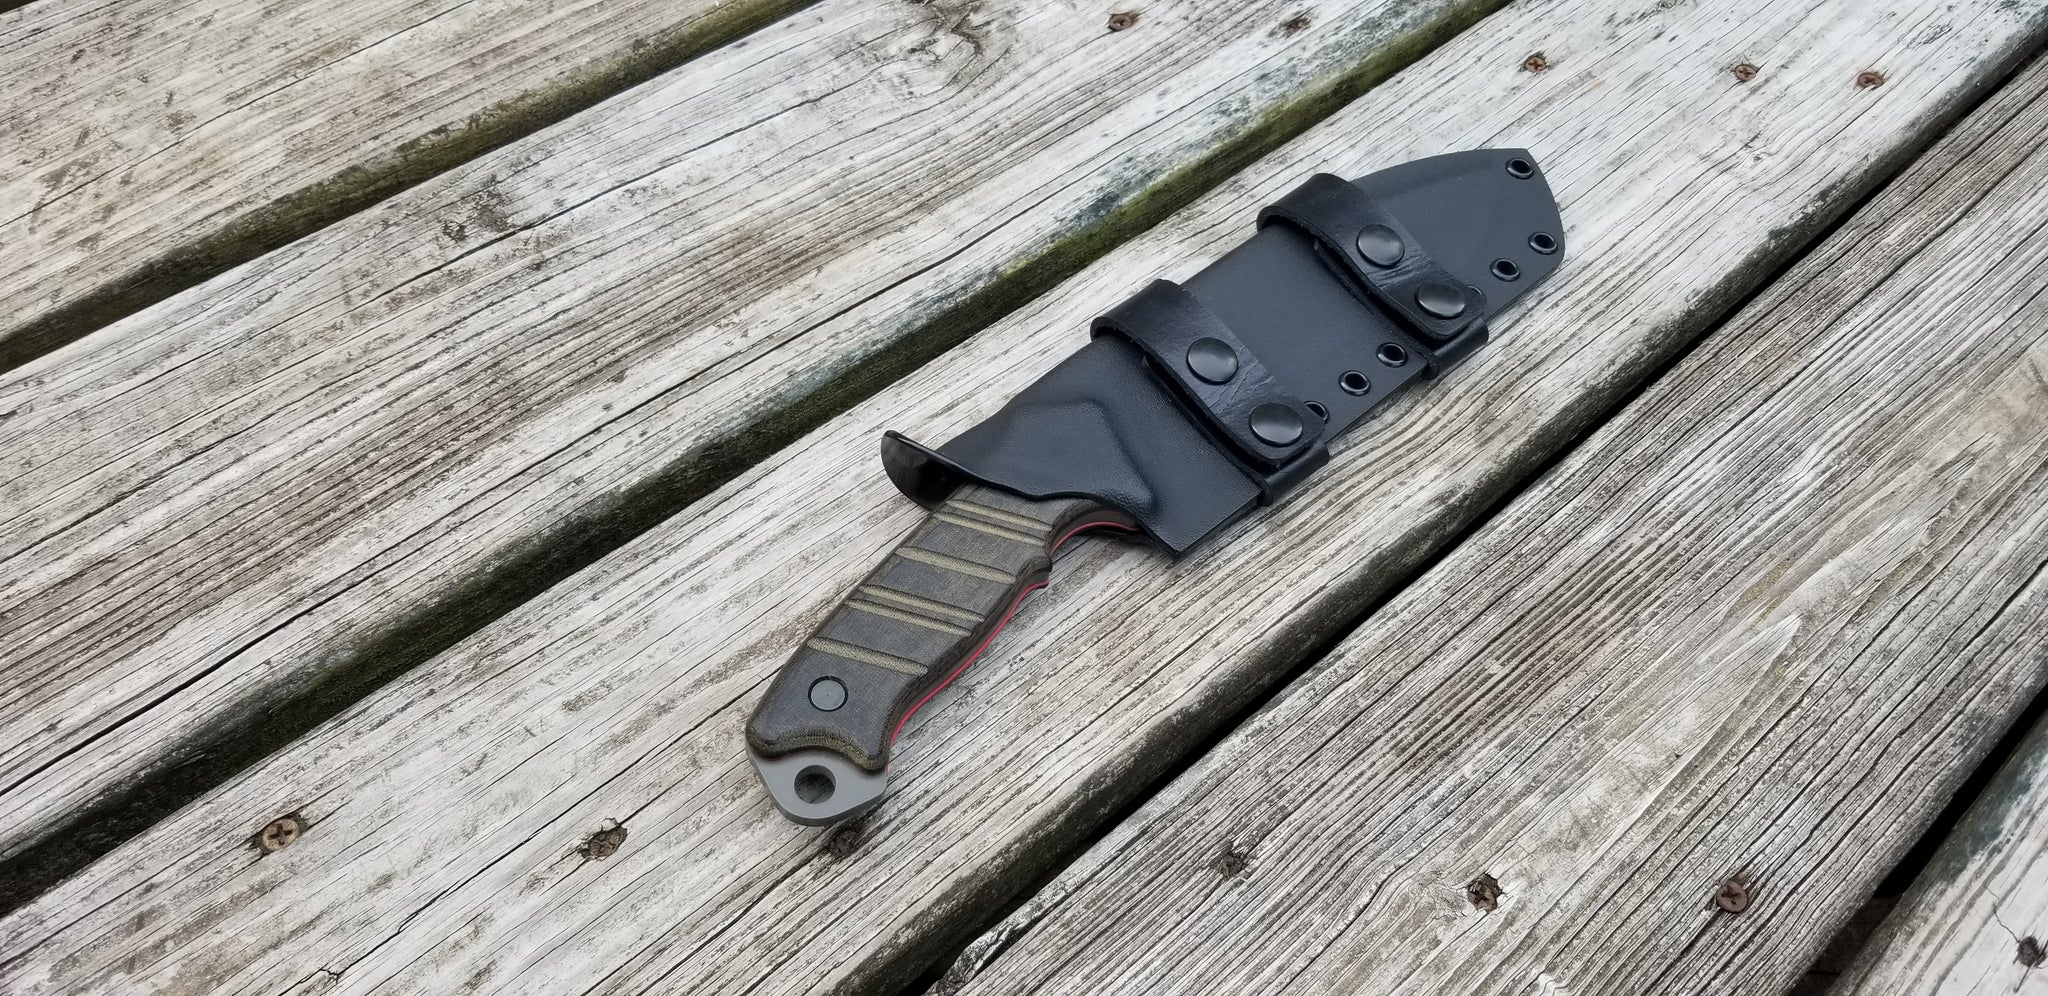 BUCK THUG Custom Taco style Kydex Sheath in Scout Carry w/ double snap leather scout straps